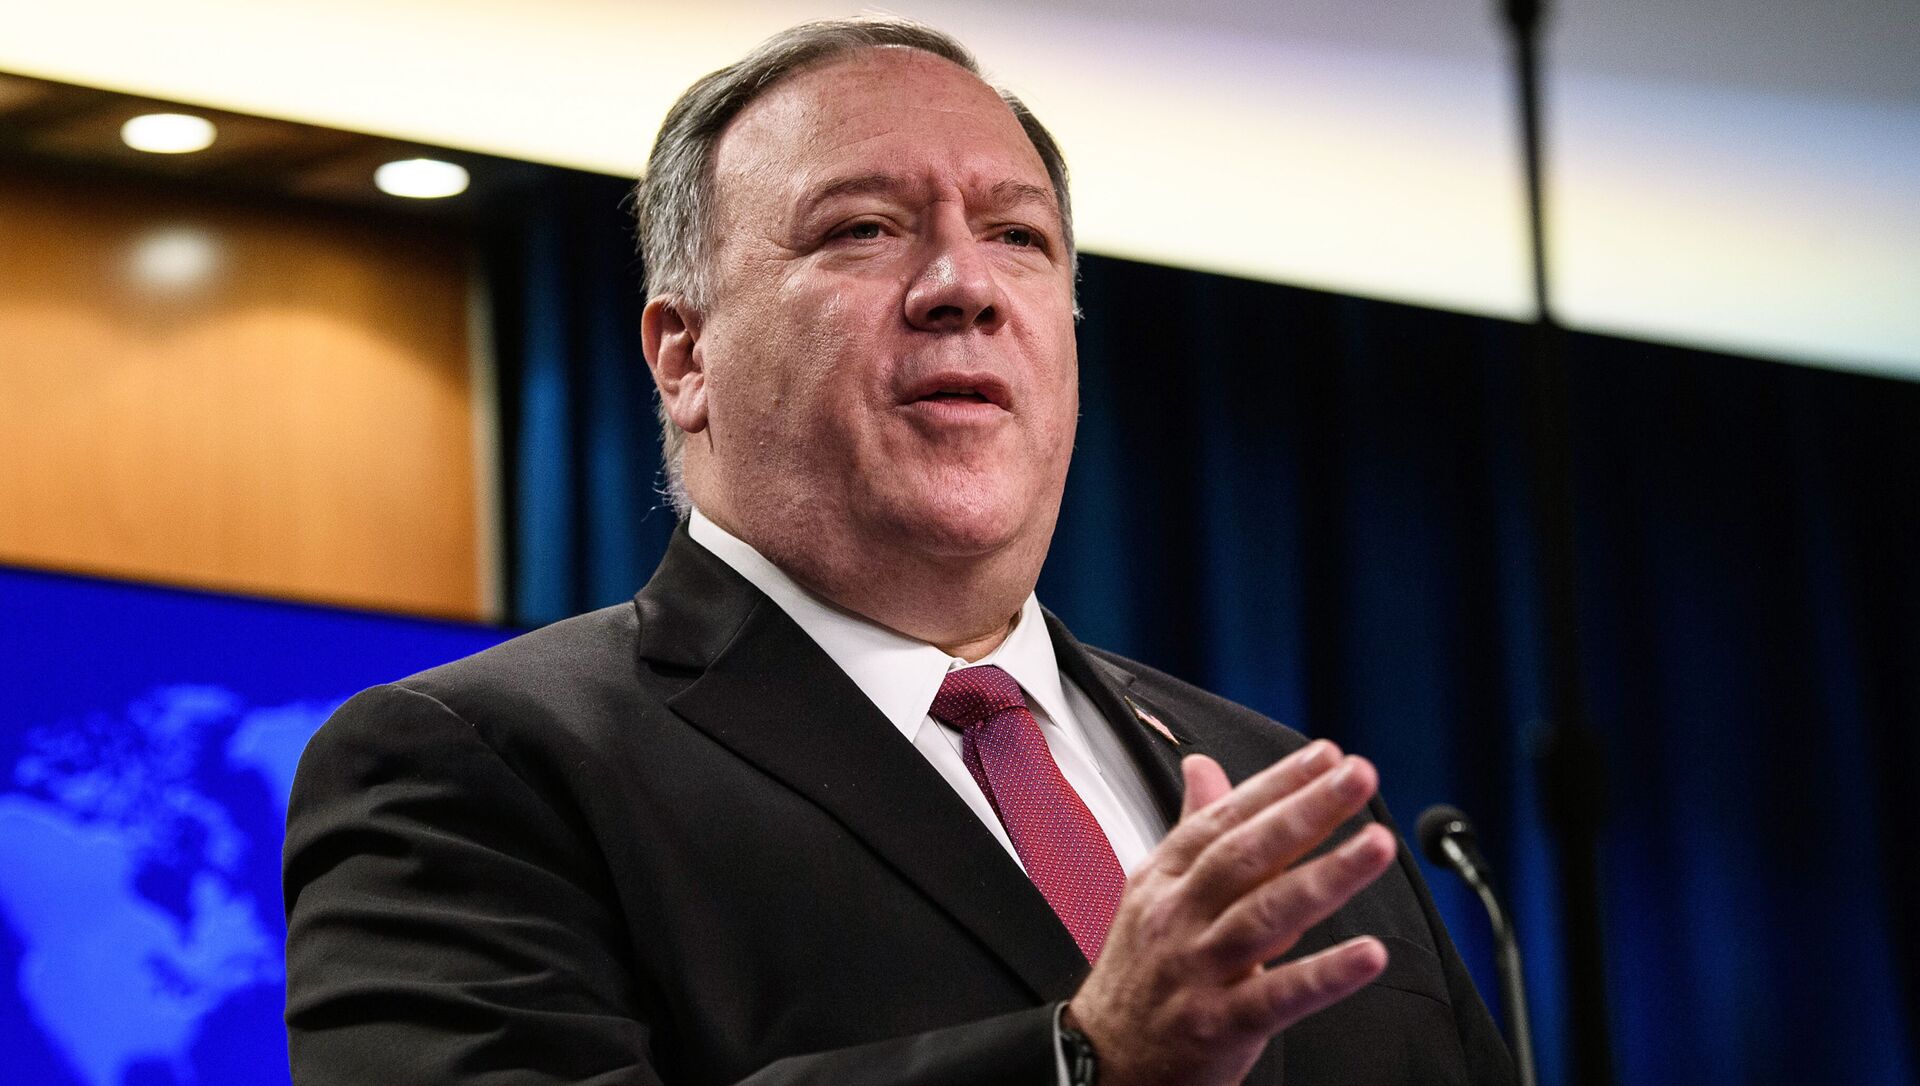 Secretary of State Mike Pompeo speaks during a news conference at the State Department in Washington, Wednesday, 21 October 2020. - Sputnik International, 1920, 09.07.2021